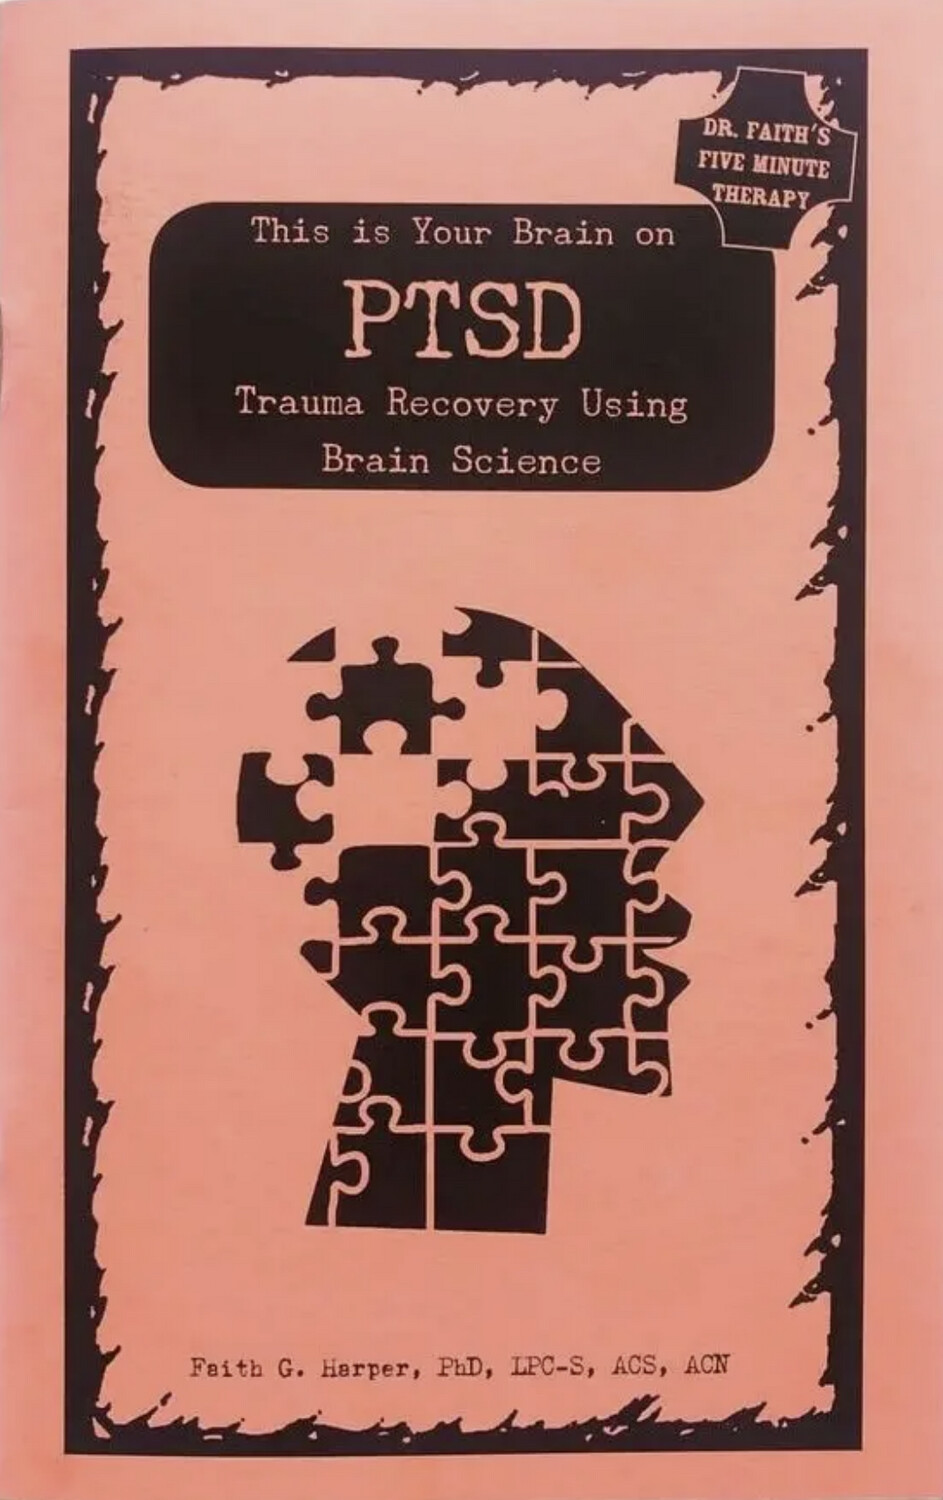 This Is Your Brain On PTSD: Trauma Recovery Using Brain Science - Zine by Dr. Faith G. Harper